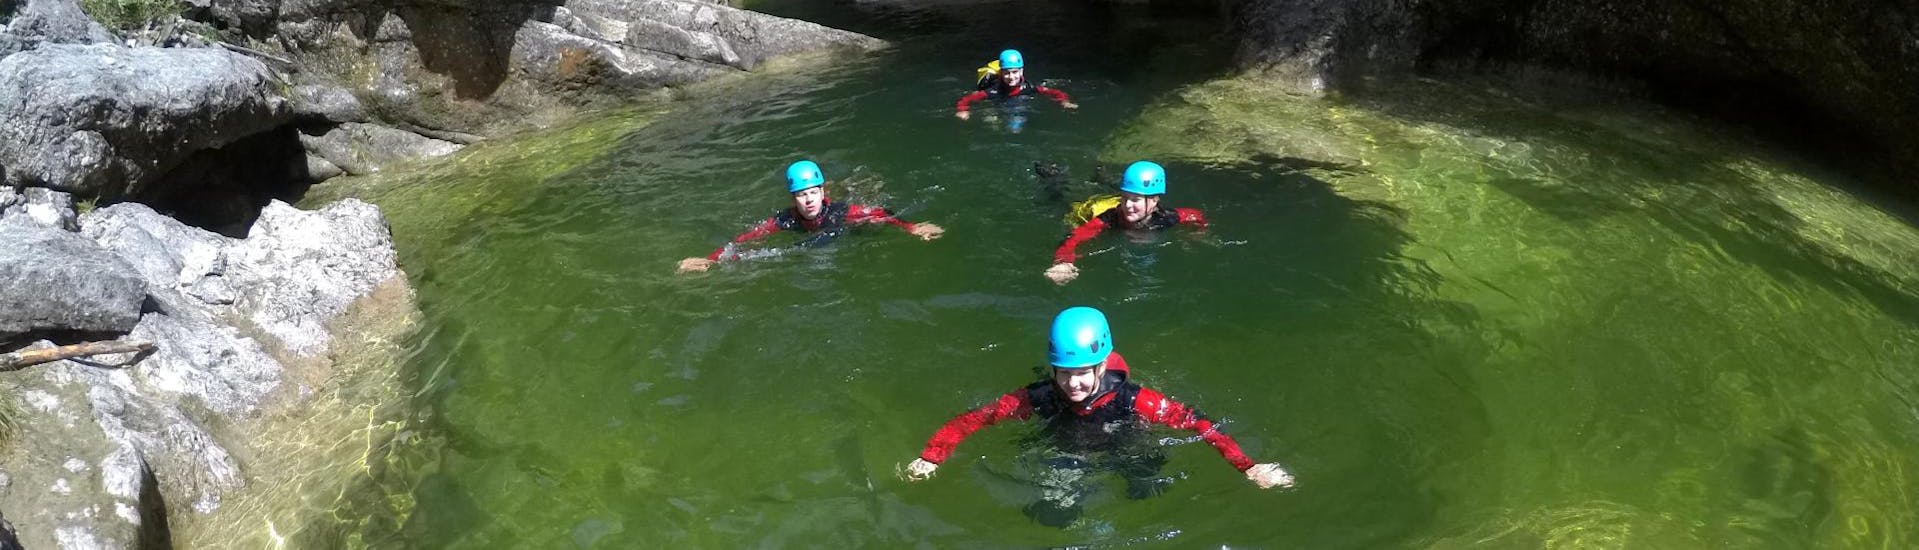 A group of people is enjoying the Canyoning for Beginners - Almbachklamm organised by professional canyoning guides from Bergführer Salzburg.